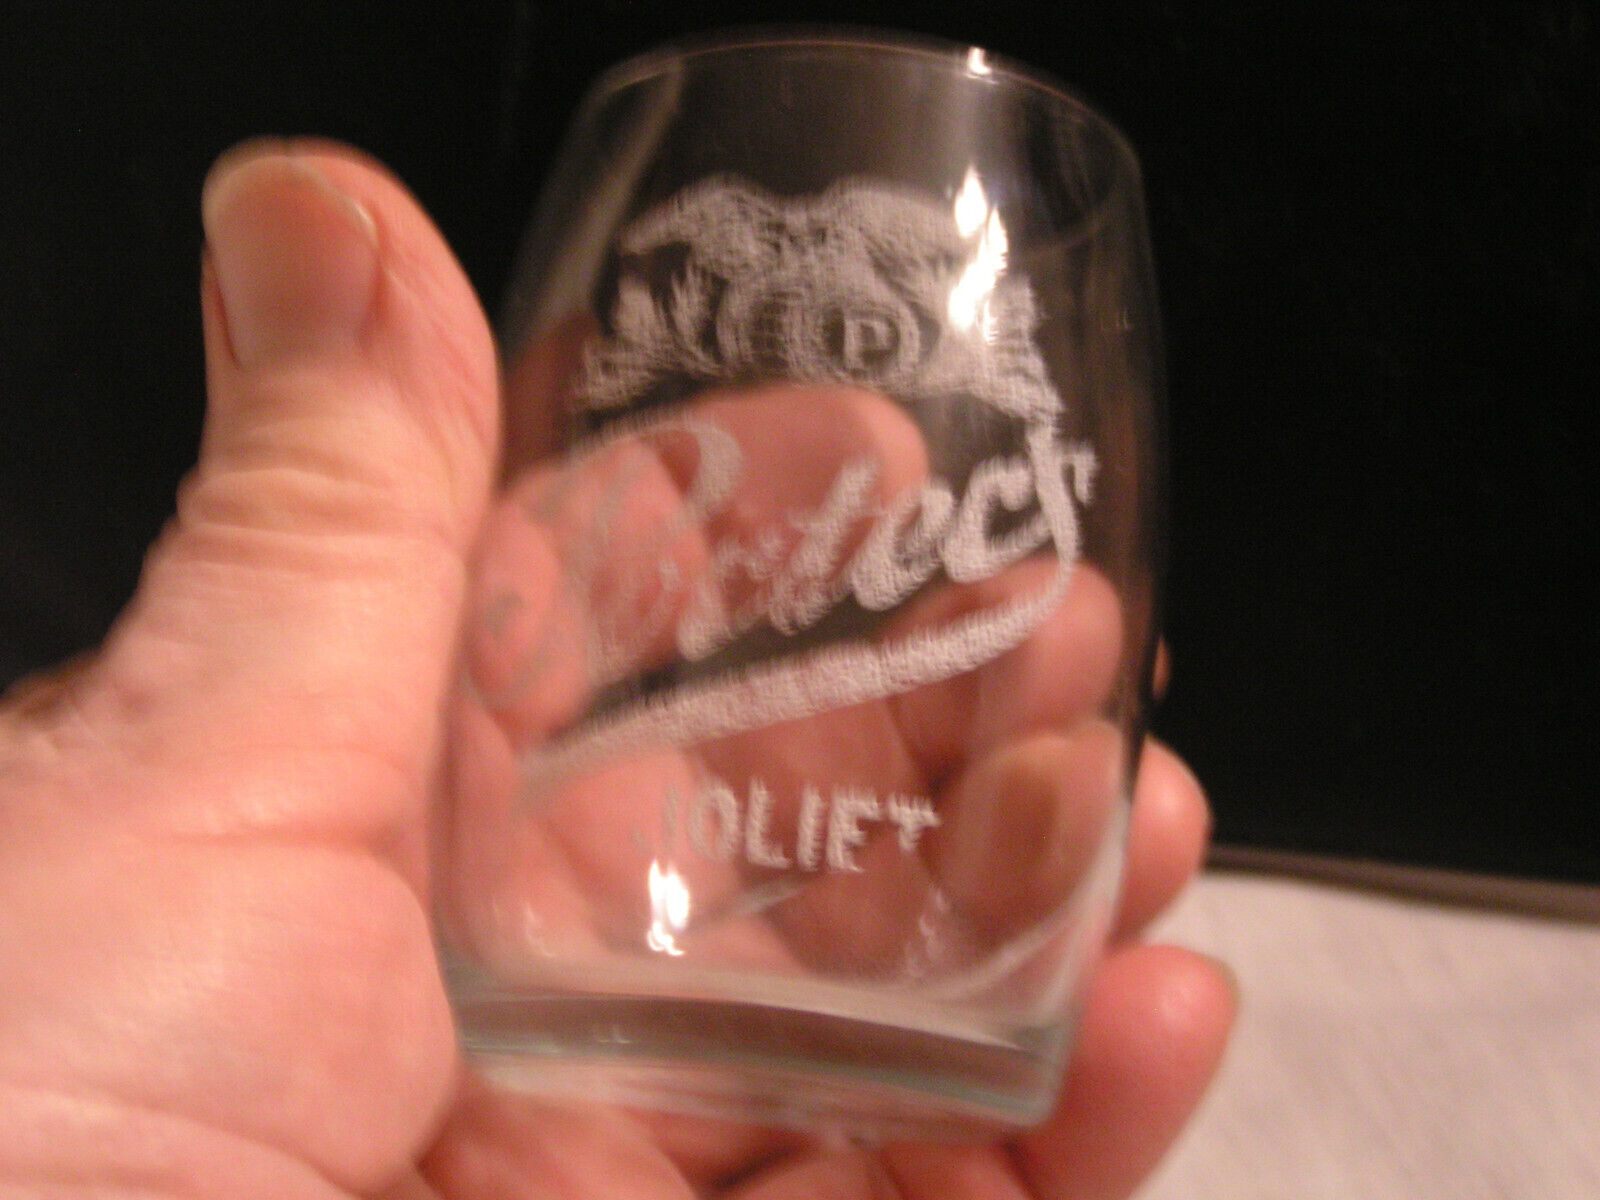 3 1/2" Tall Barrel Shaped Beer Glass For Porters Beer, Joliet,il